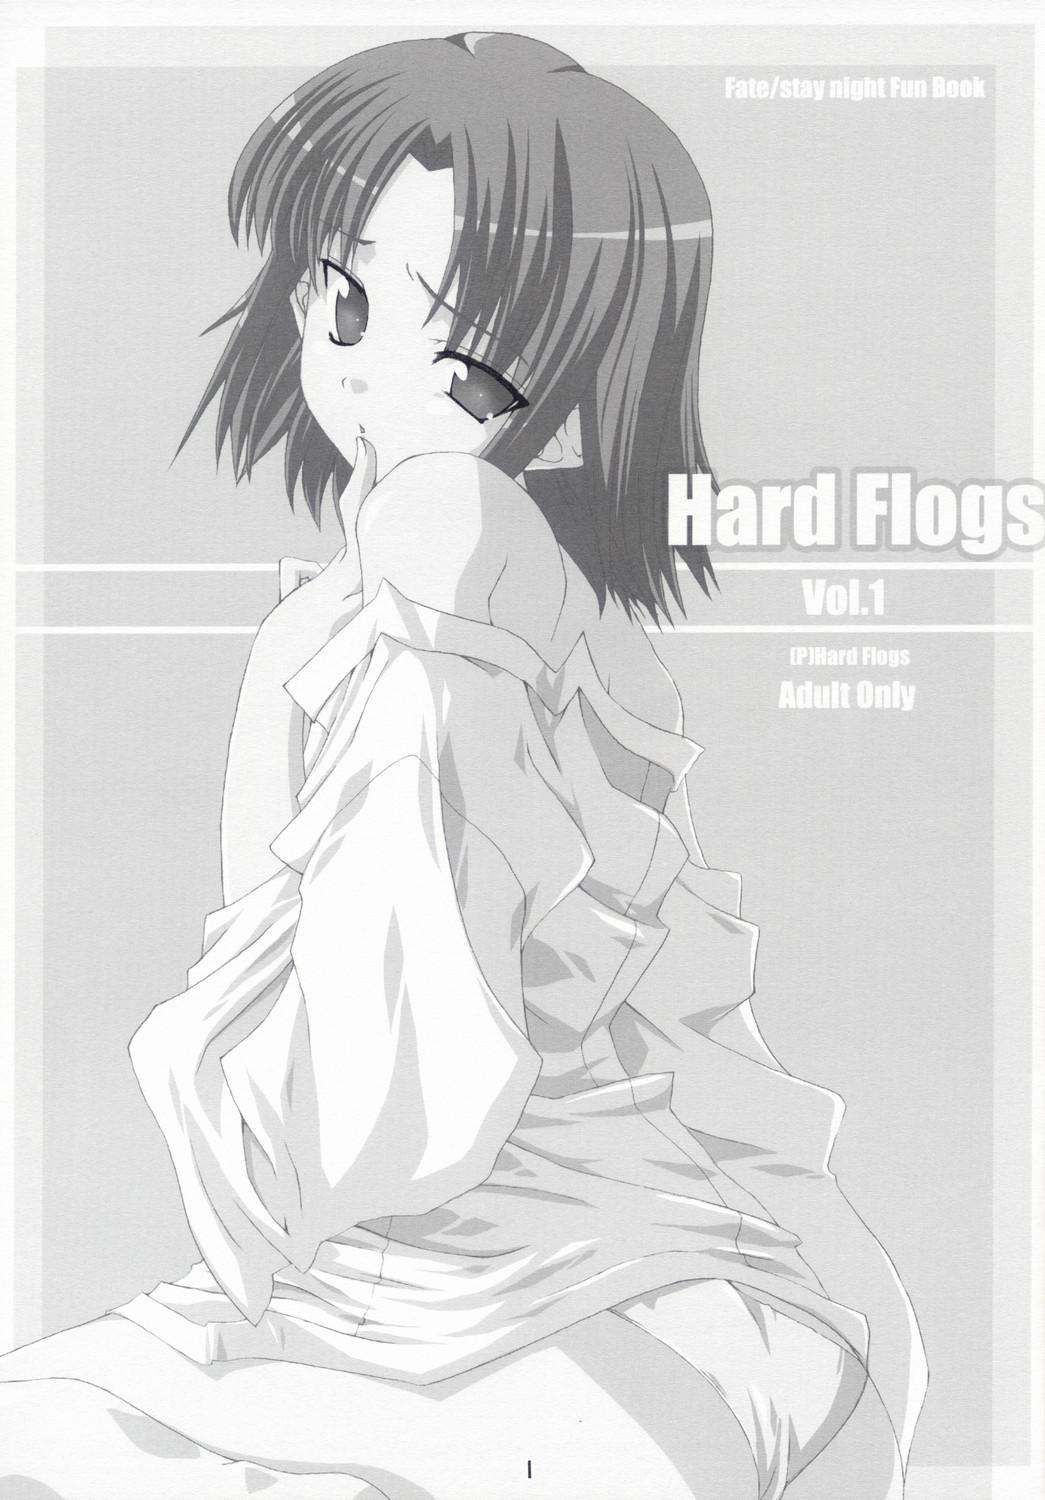 Perfect Tits Hard Flogs Vol.1 - Fate stay night Making Love Porn - Page 2